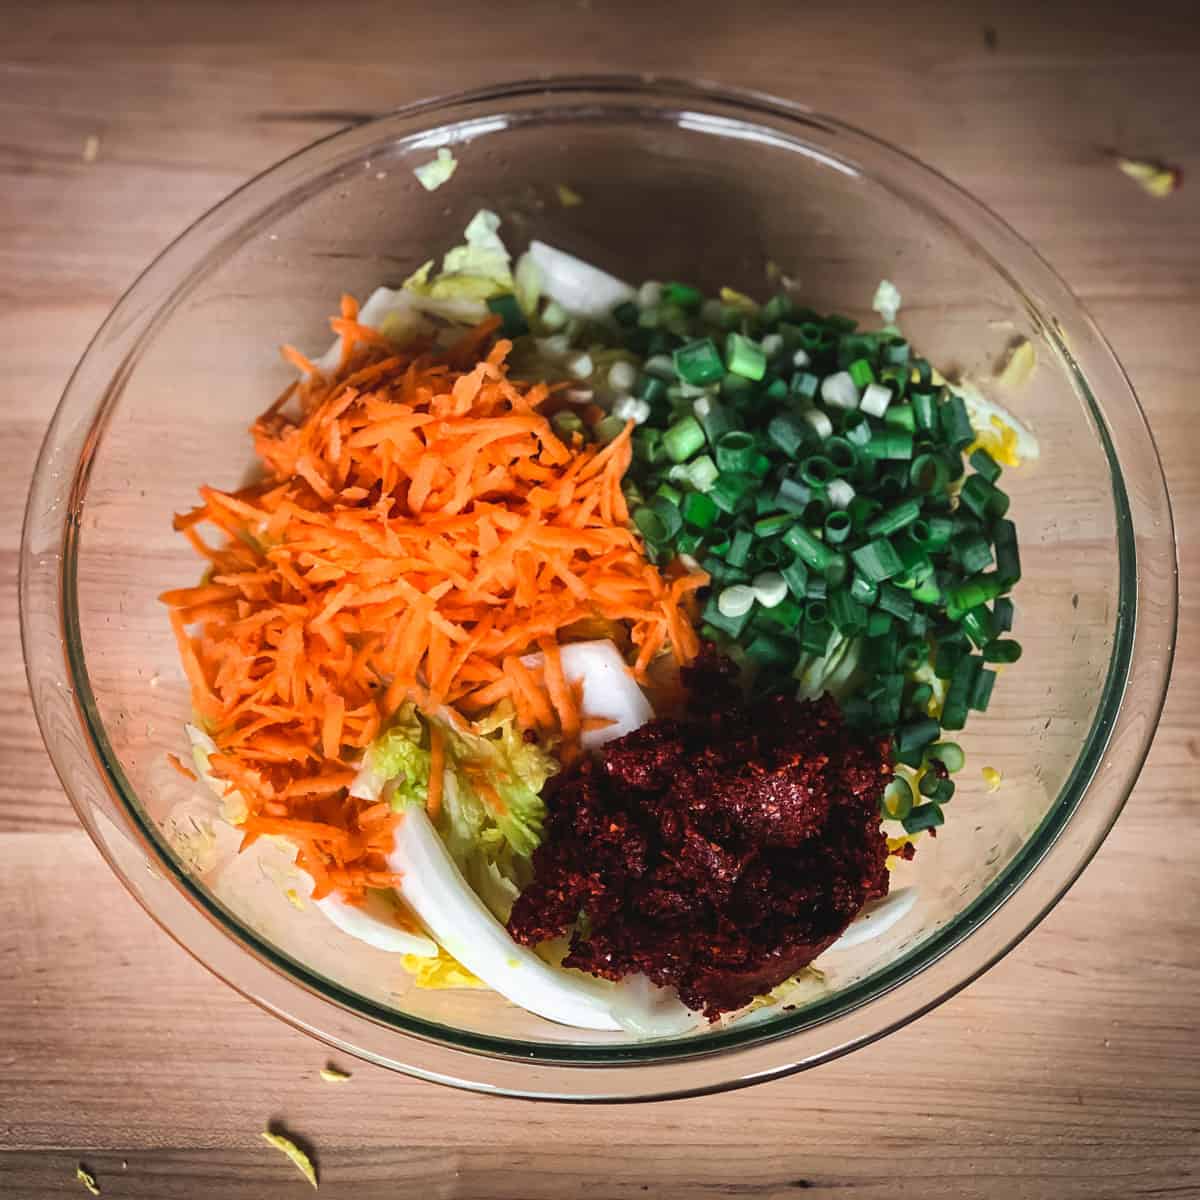 adding the carrots, onions, and spices to the bowl of cabbage